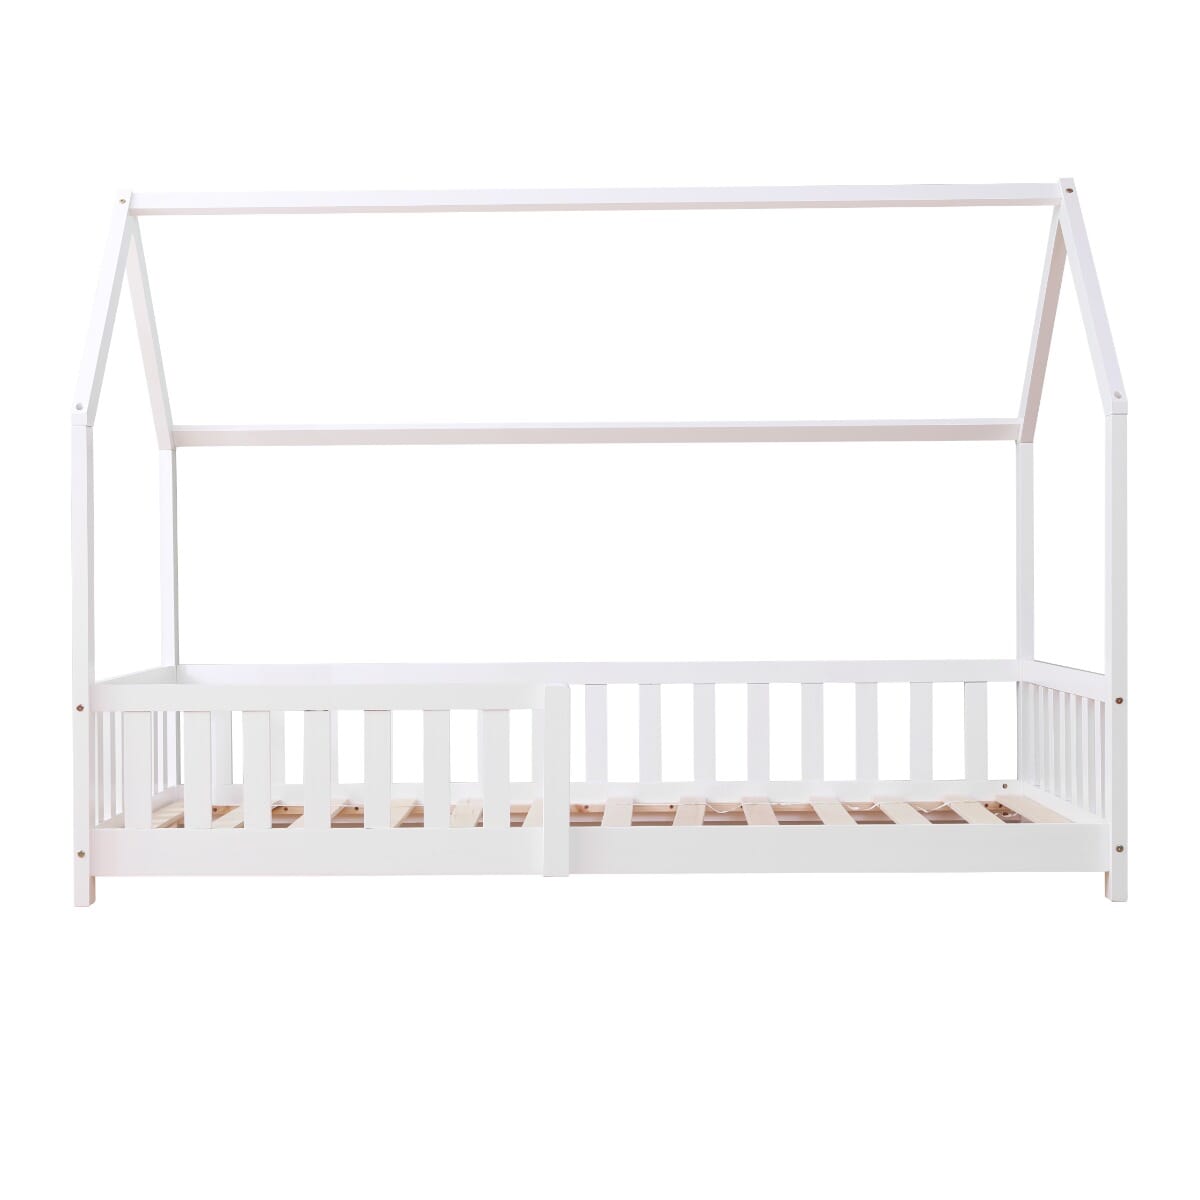 Flair White Wooden Explorer Playhouse Single Bed With Rails